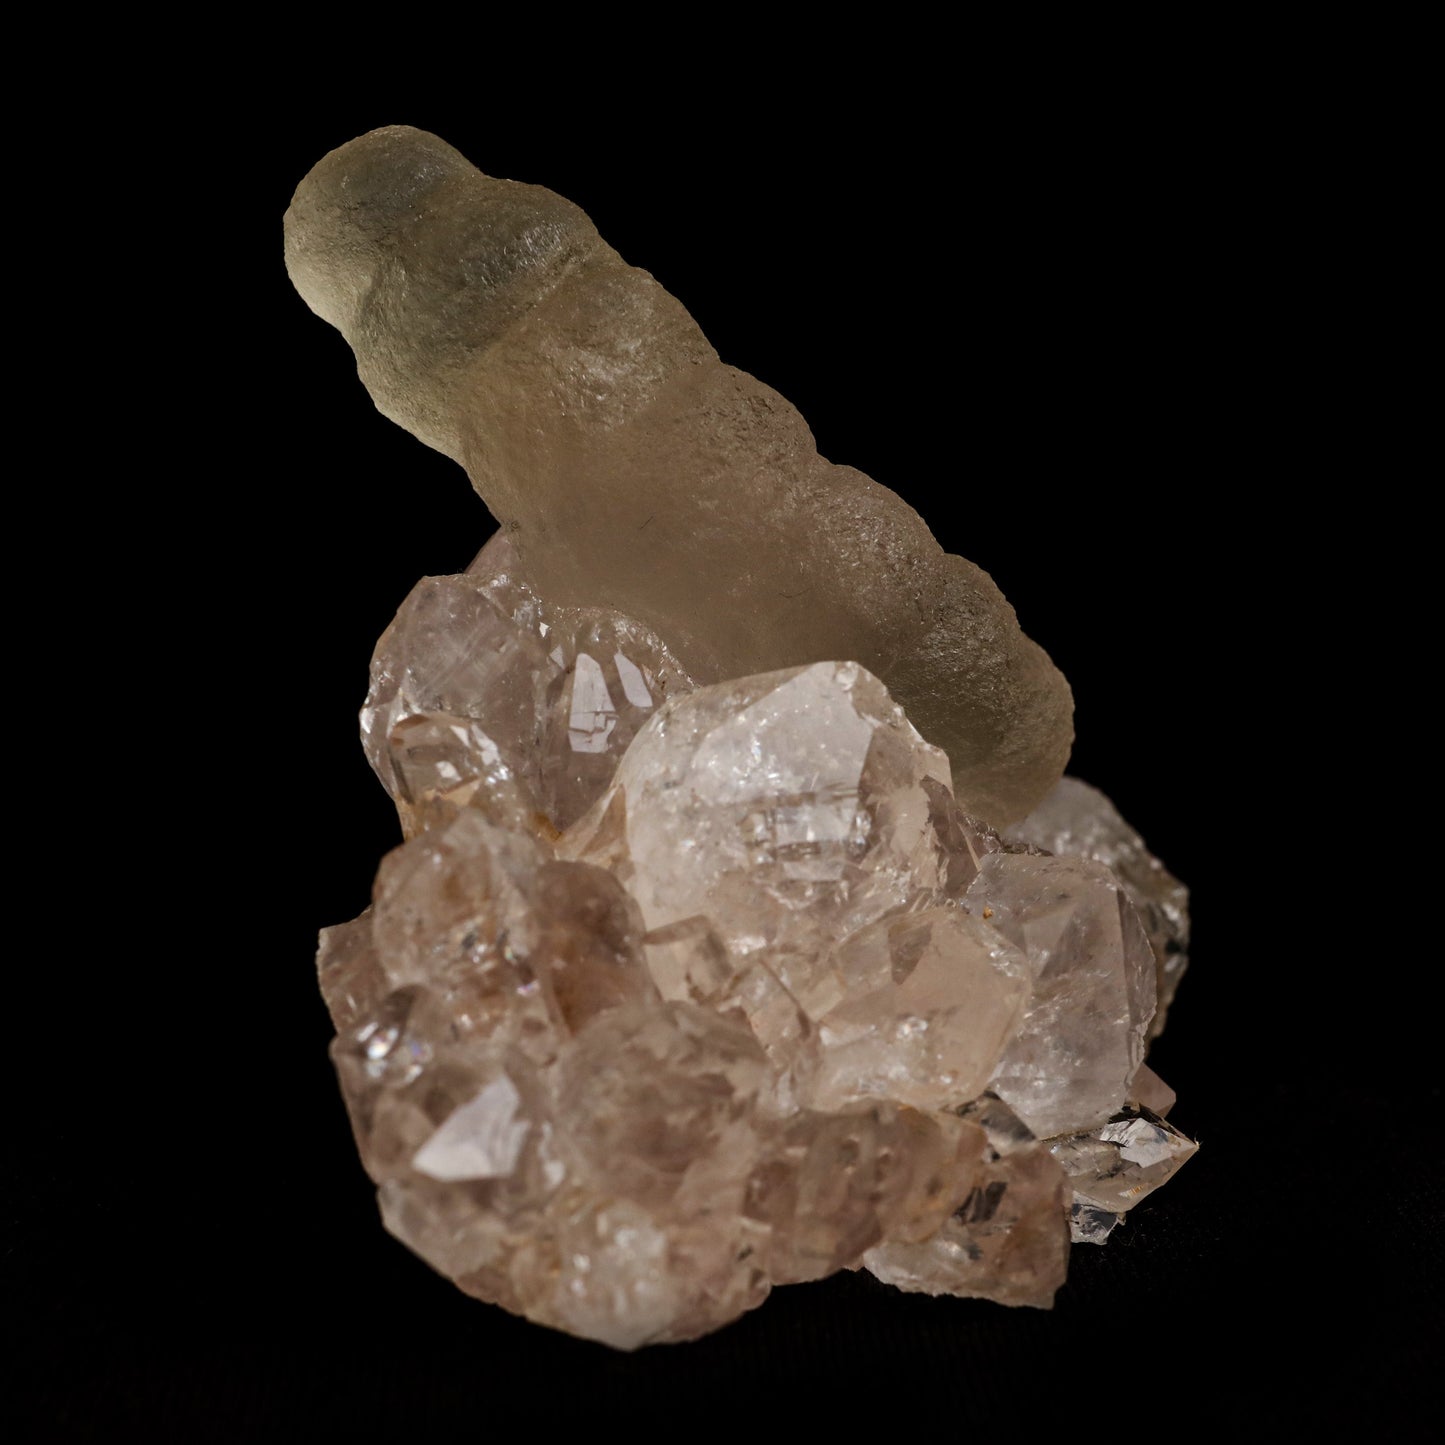 Fluorite (unusual Formation) on MM Quartz Natural Mineral Specimen # …  https://www.superbminerals.us/products/fluorite-tamarind-formation-on-mm-quartz-natural-mineral-specimen-b-5050  Features: The Fluorite on this specimen has a yellow or gold hue and despite the fact that it is not truly crystallized (it's essentially spherical and/or amorphous), it's very gemmy and eye-catching when backlit. The Fluorite is sitting on gemmy colorless Quartz crystals, some of which show very minor Amethyst